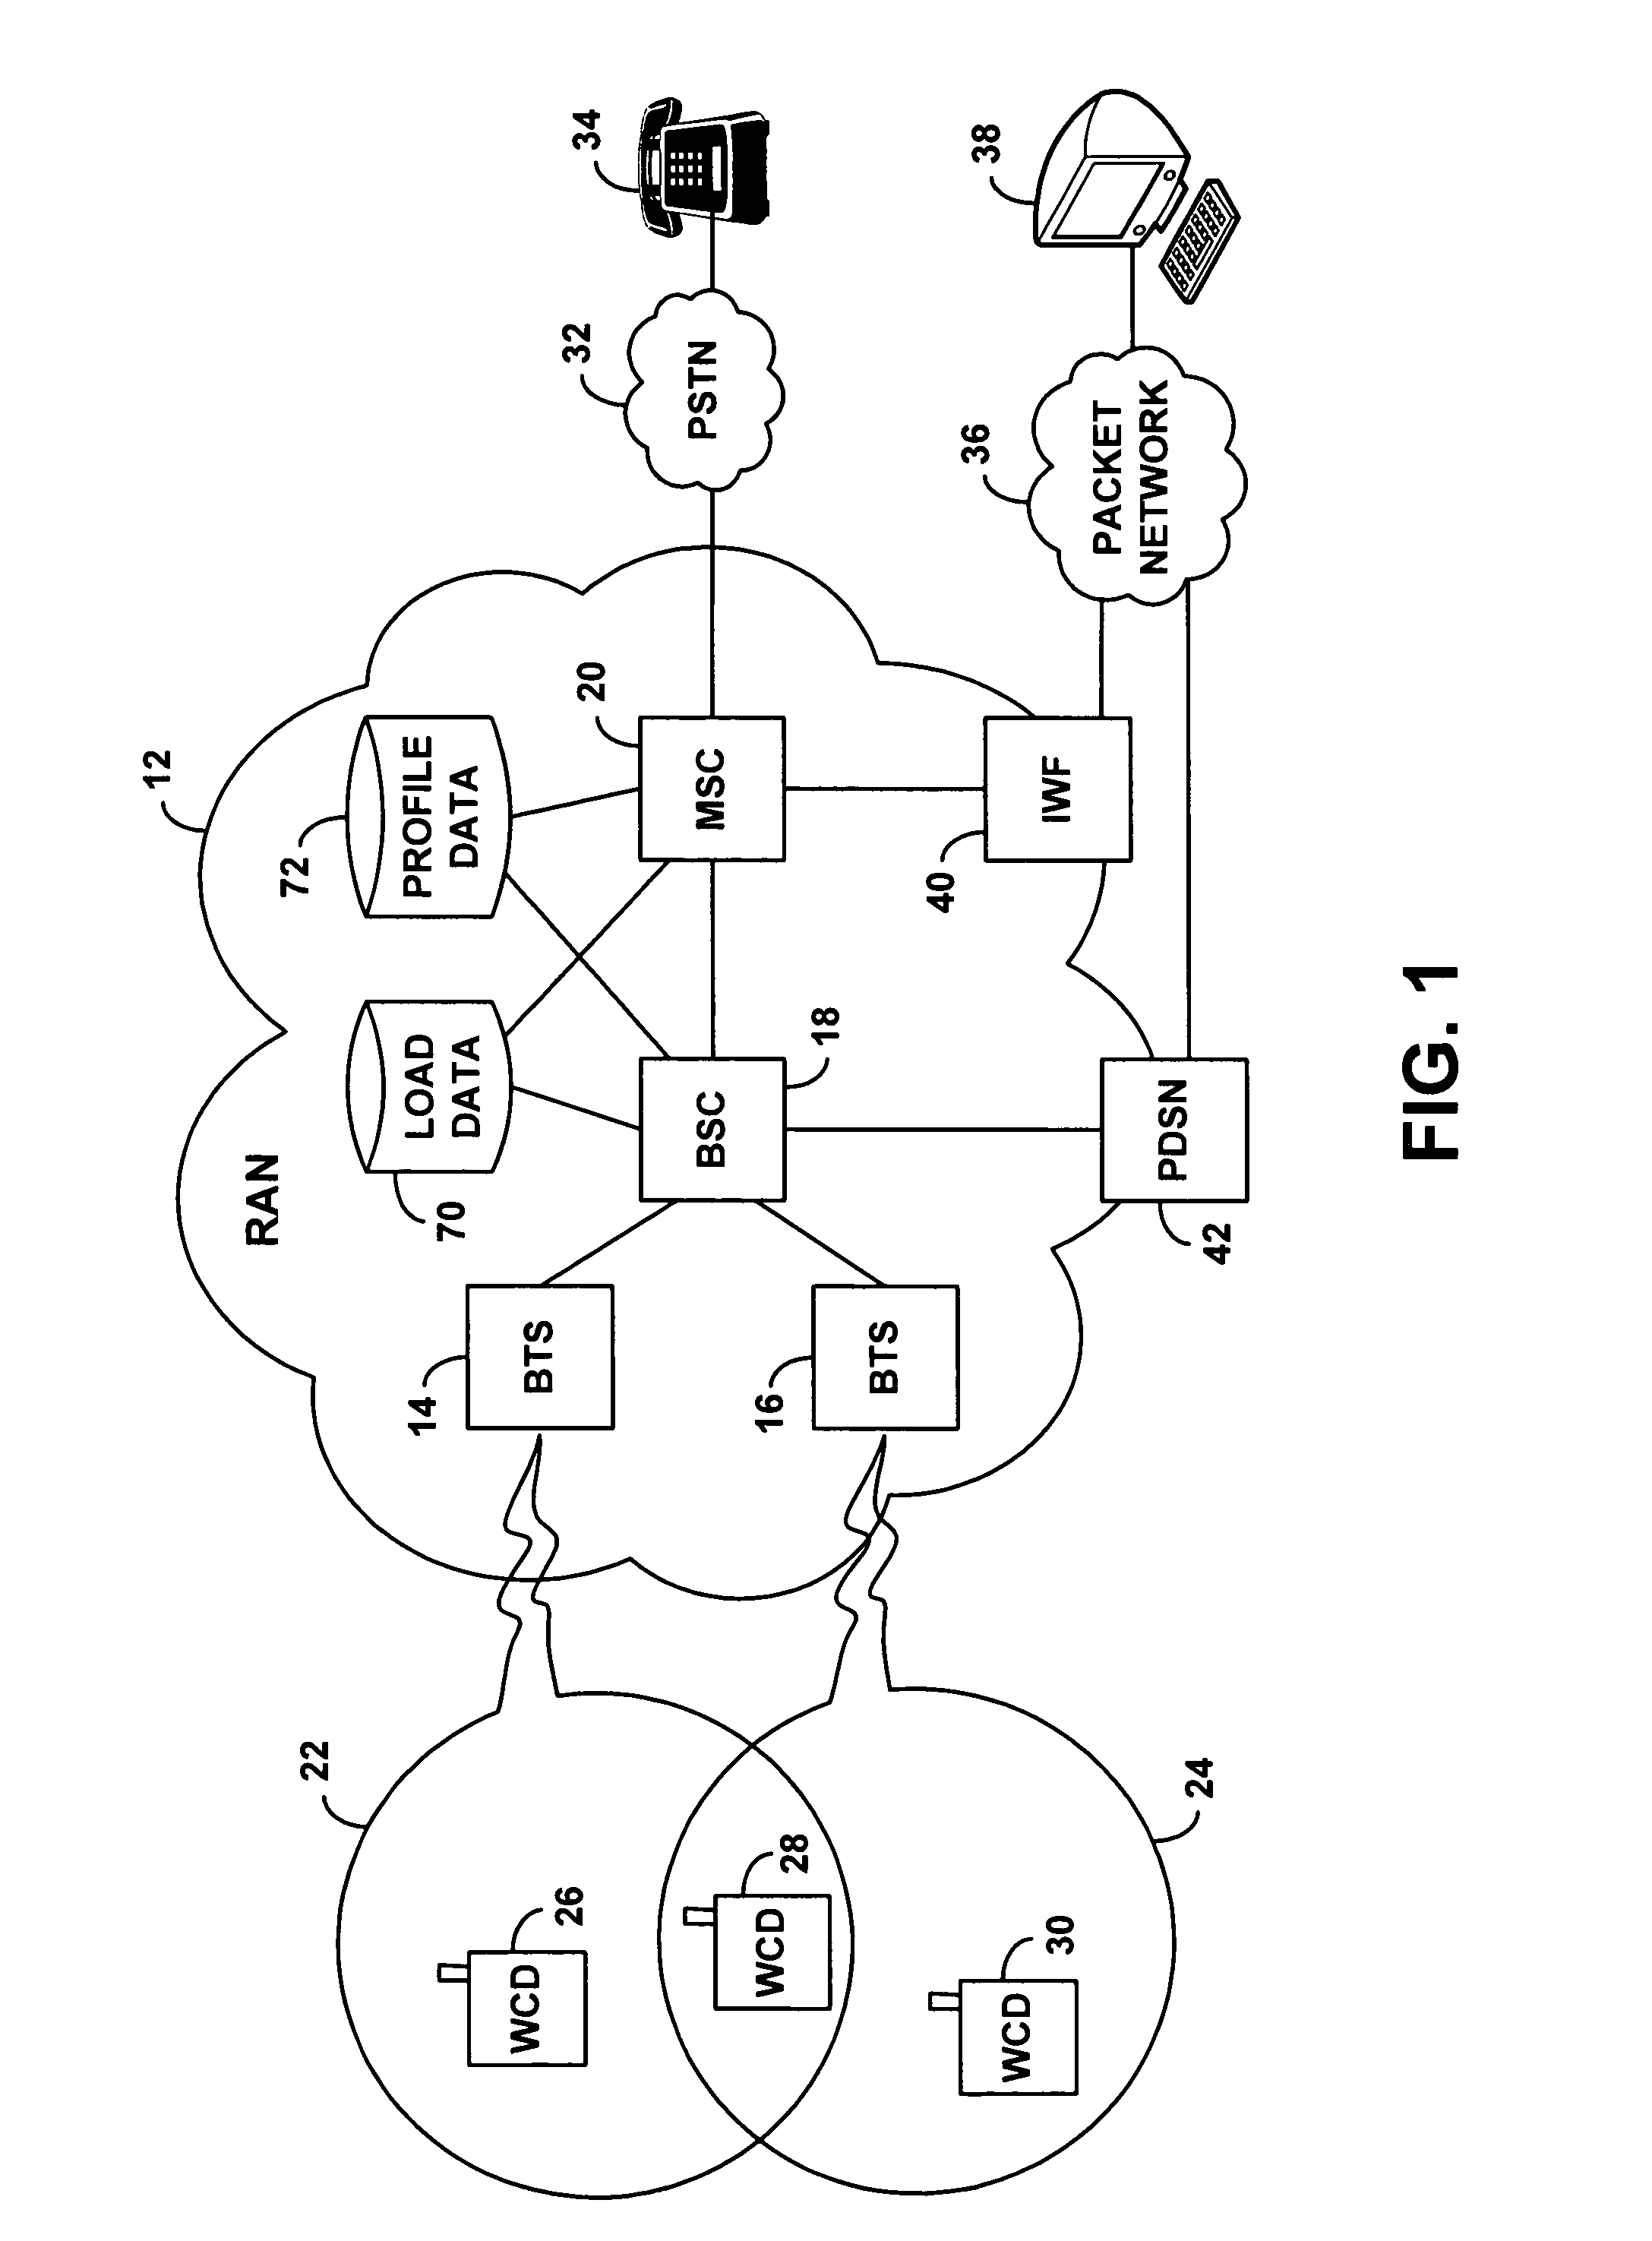 Method and system for wireless admission control based on fixed or mobile nature of wireless communication devices